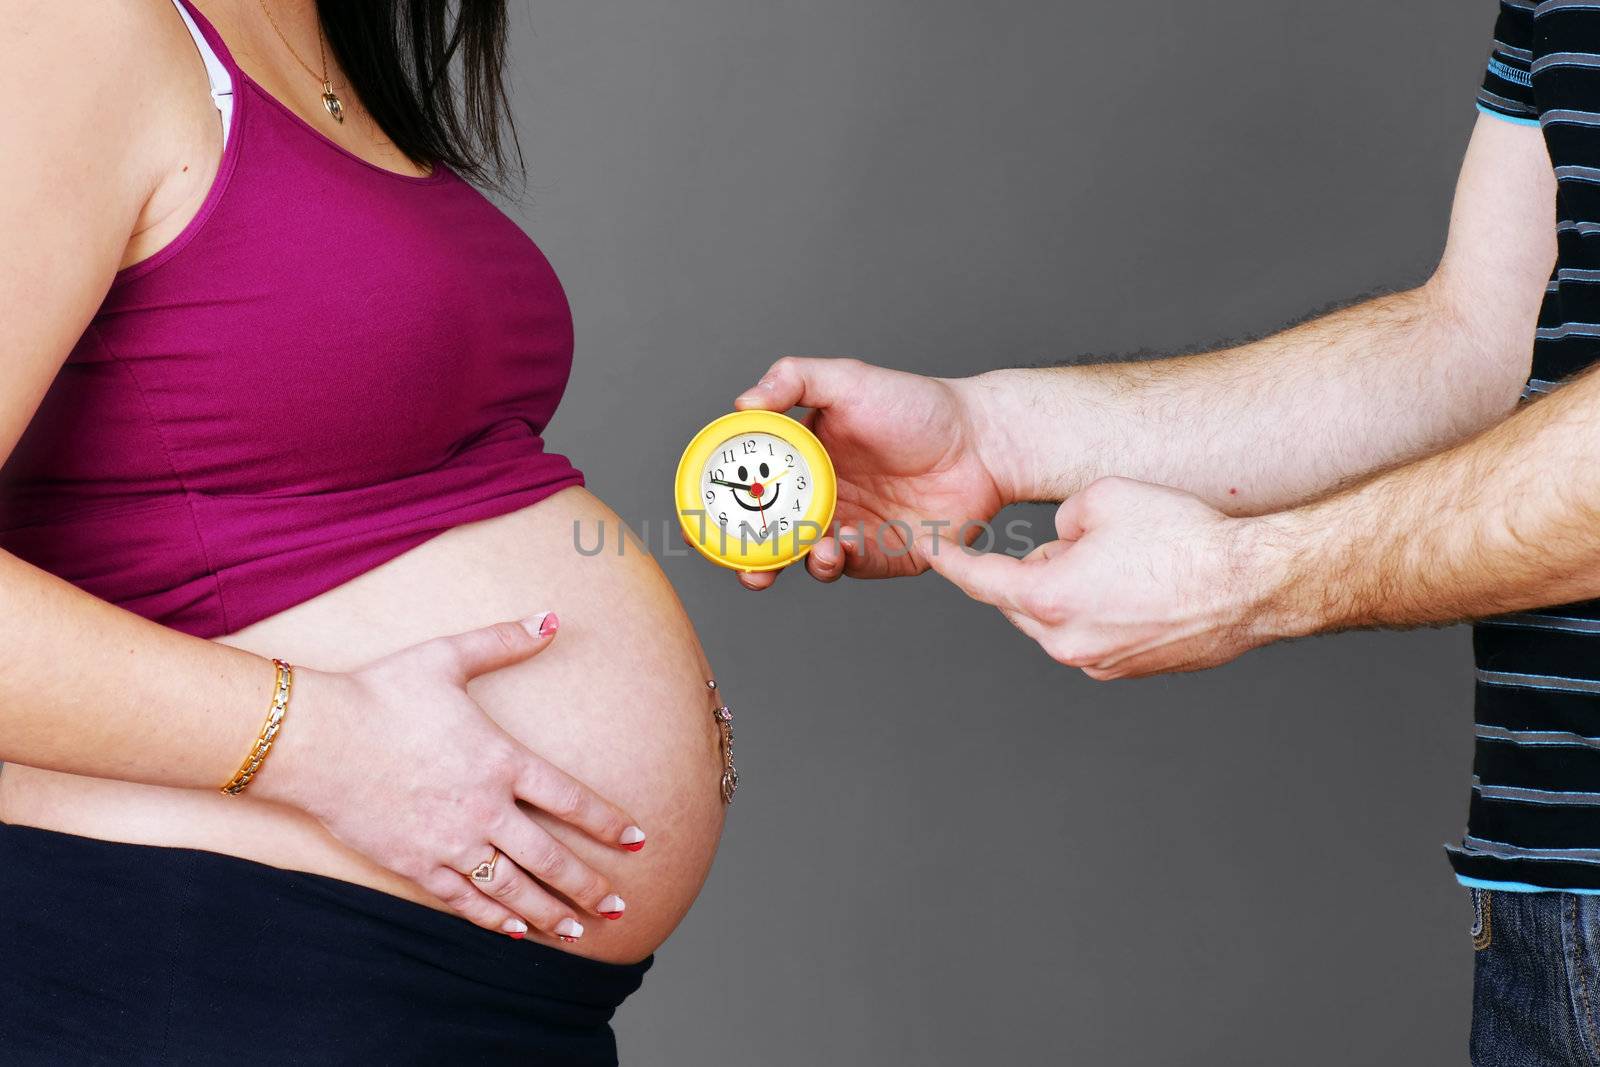 Funny pregnancy concept of dad showing the time to his pregnant wife's belly, implying that it is time to give birth.